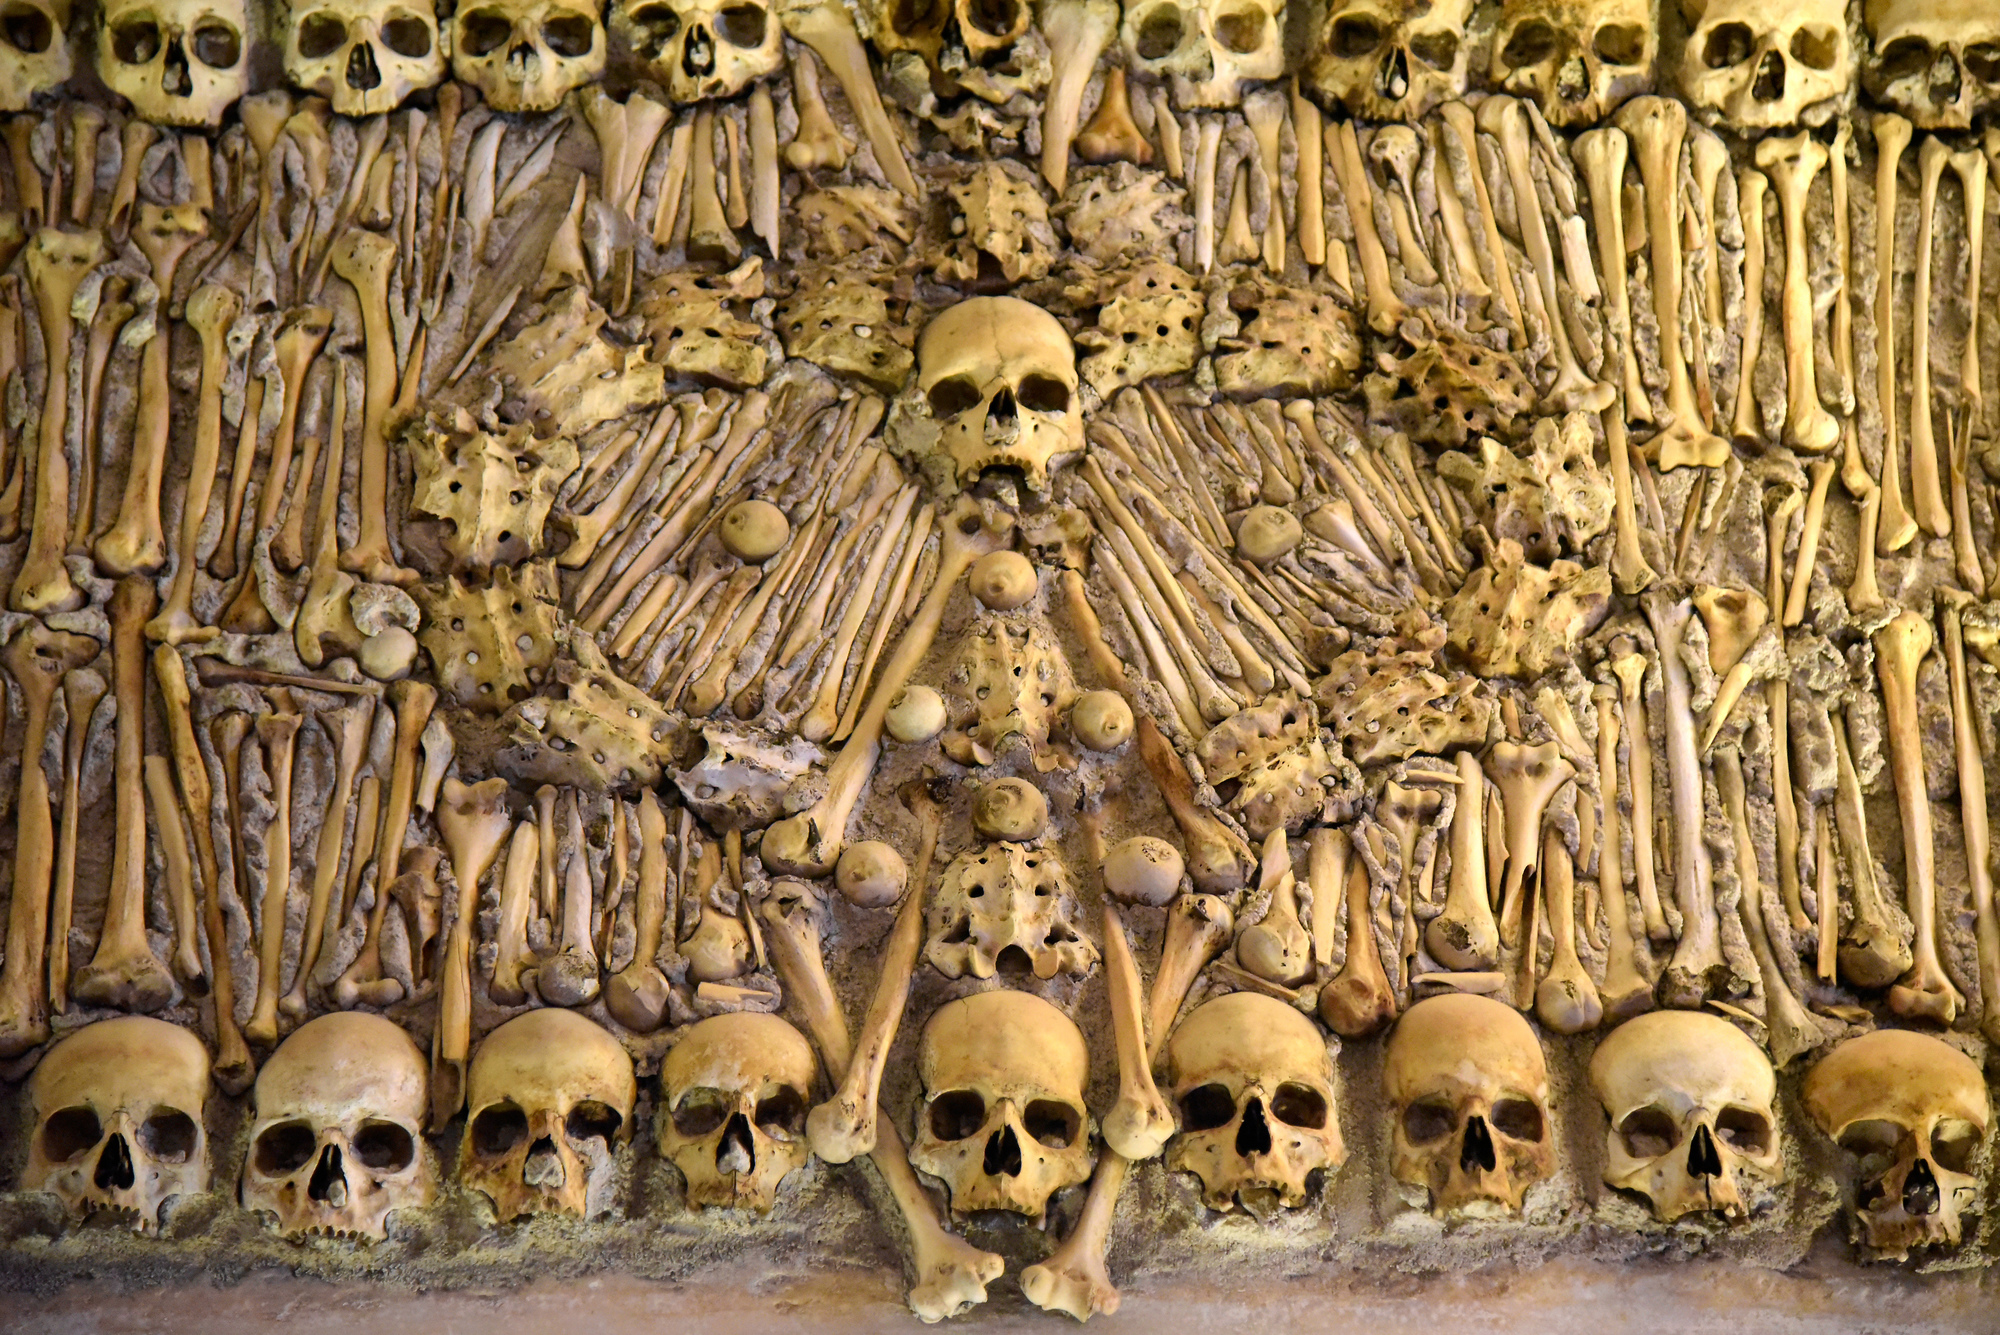 Chapel Of Bones - The Fascinating Stories Of The Churches Of The Dead